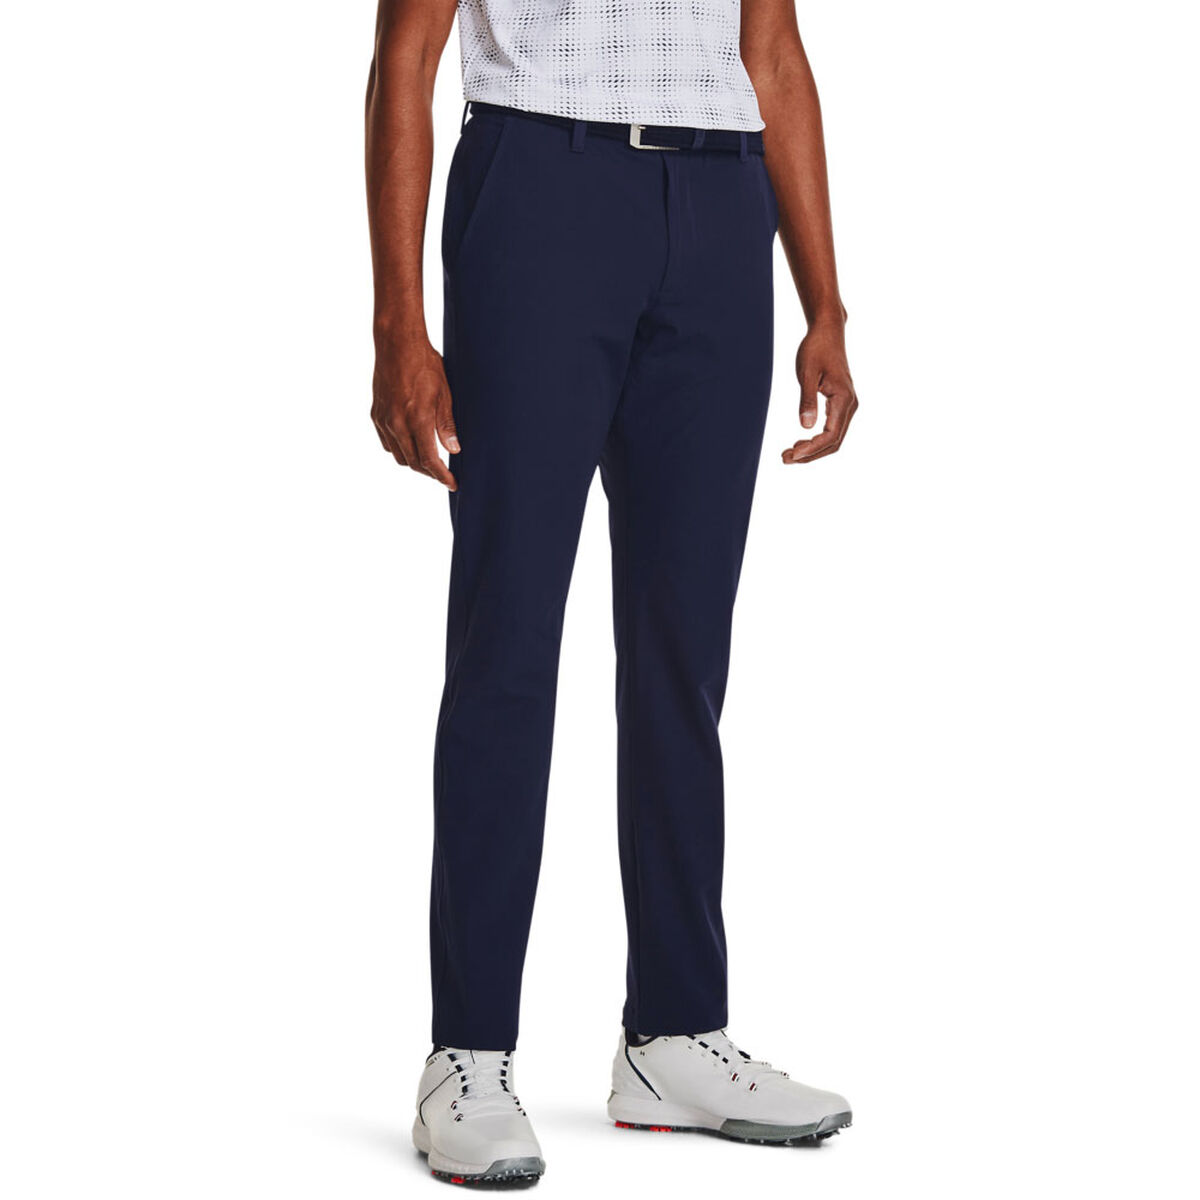 Under Armour Men’s Drive Tapered Golf Trousers, Mens, Midnight navy/halo gray, 40, Regular | American Golf